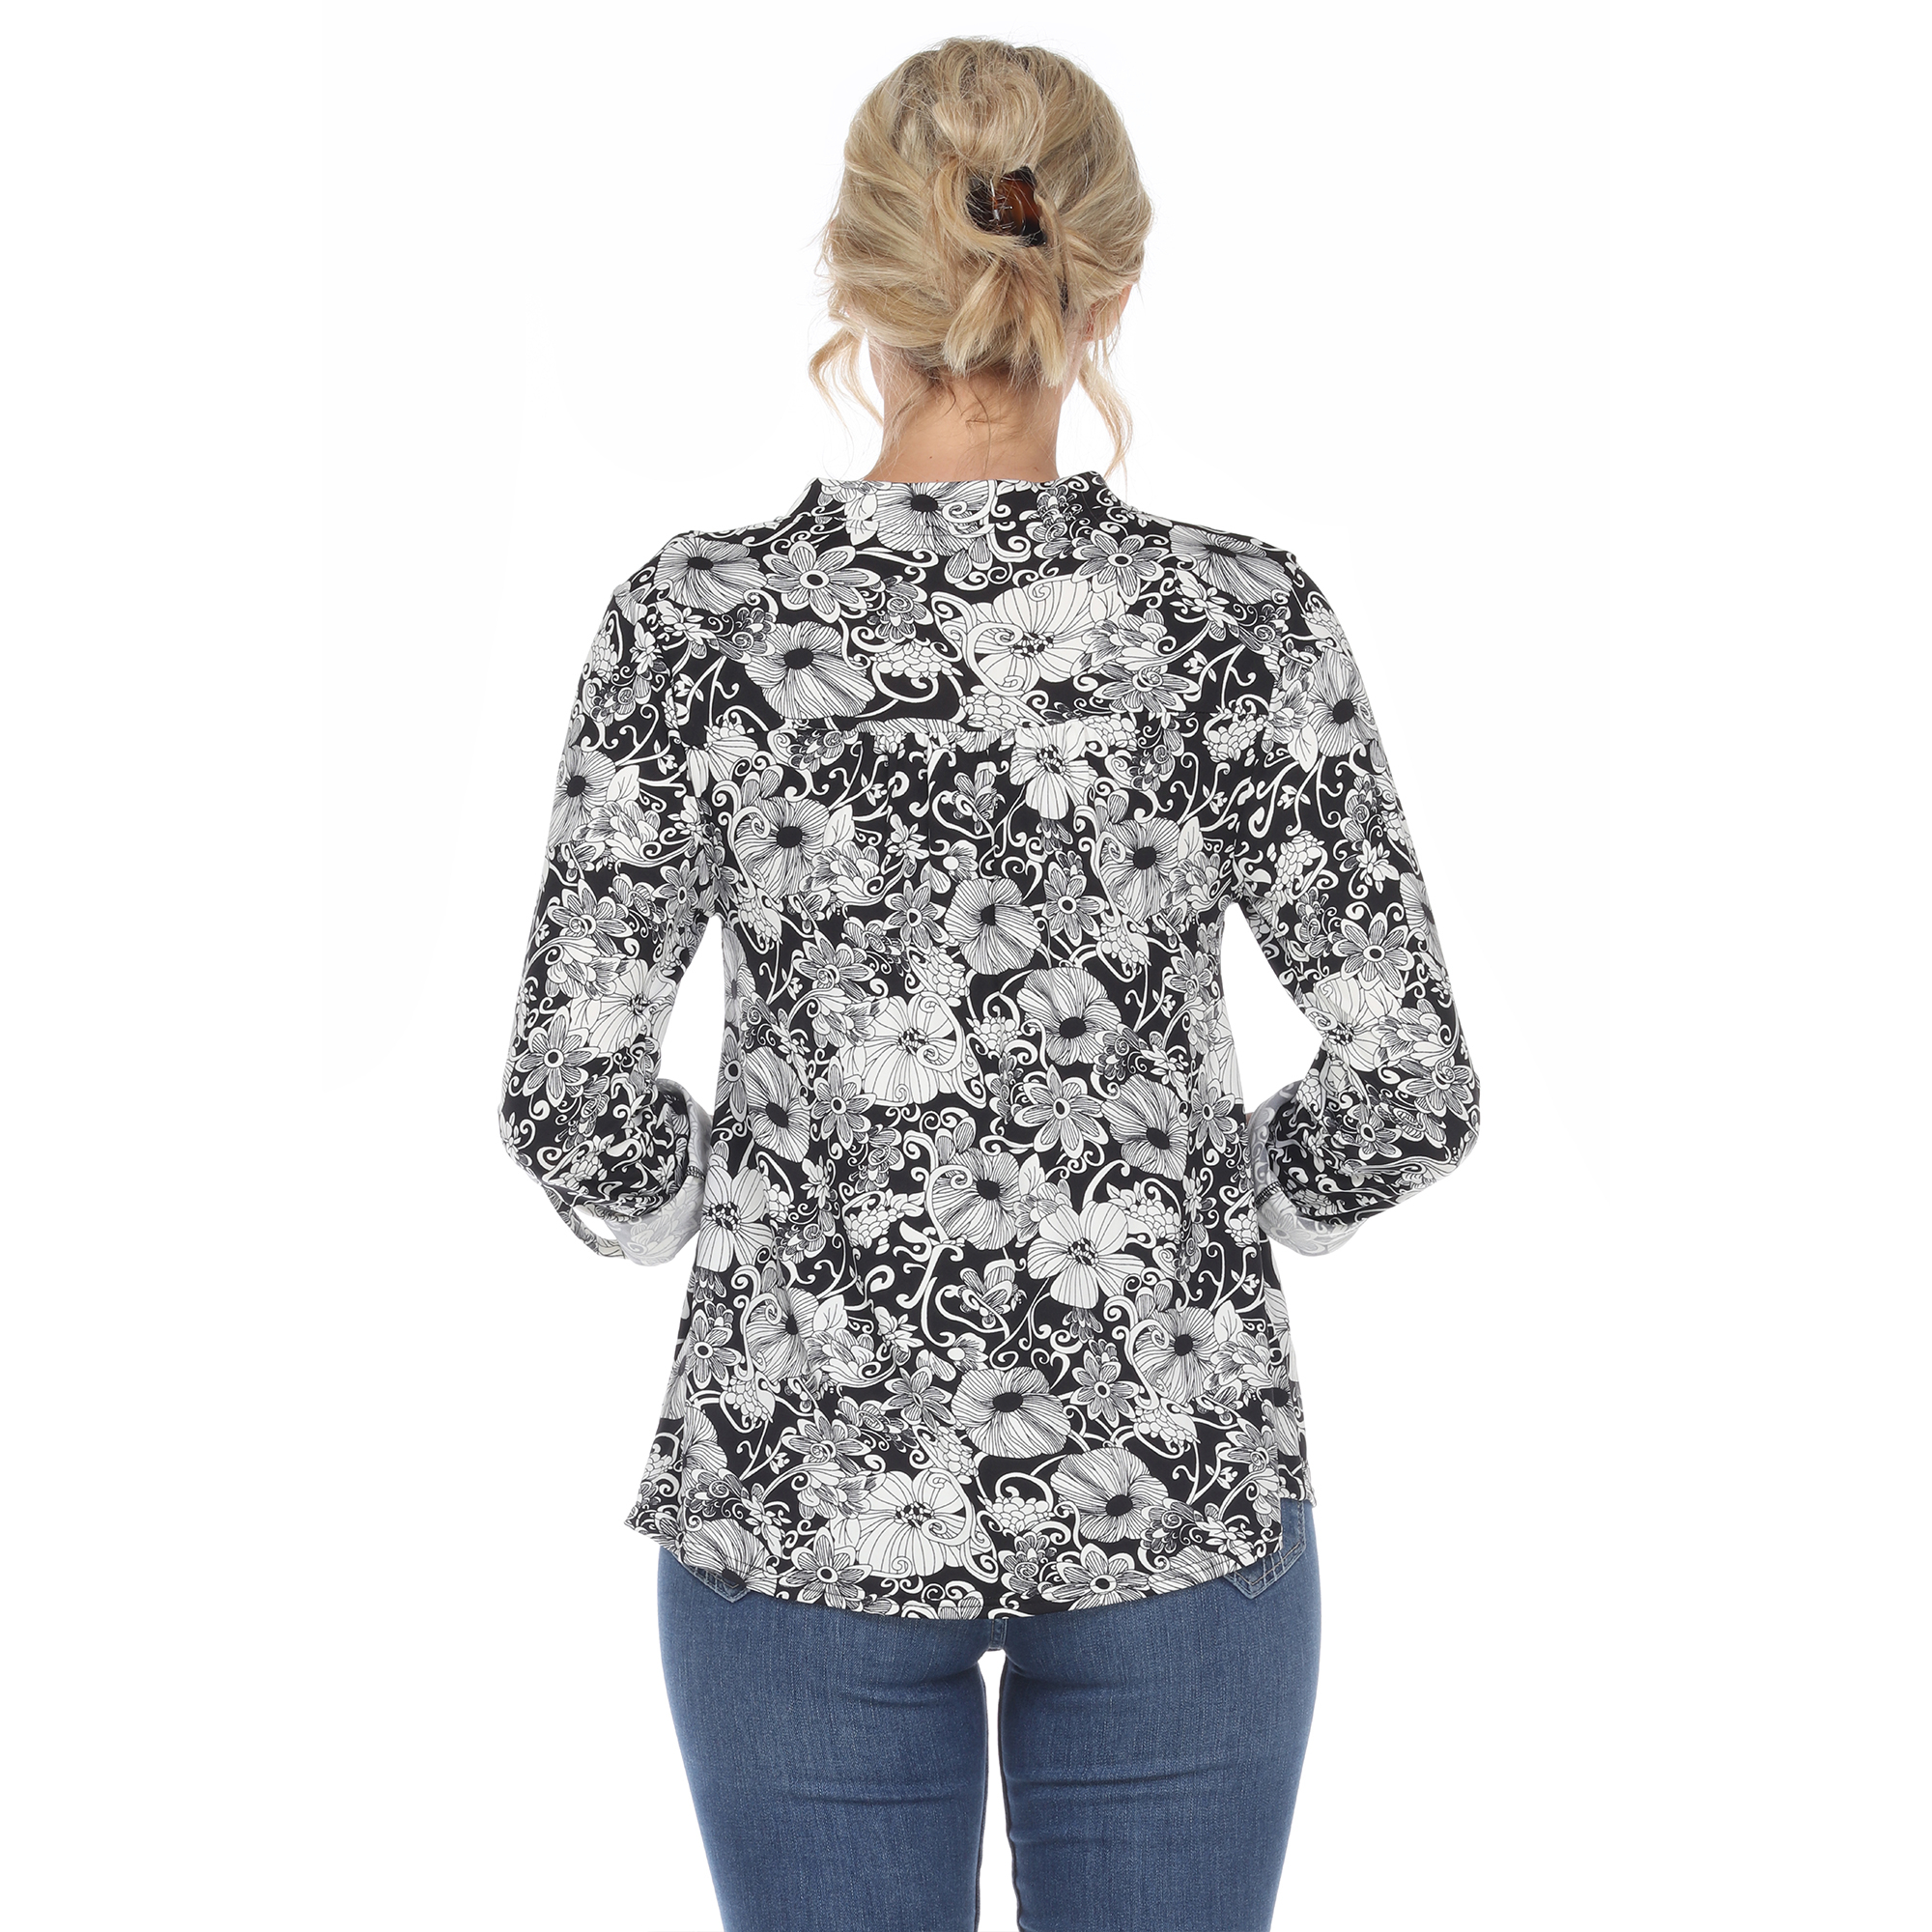 White Mark Women's Pleated Long Sleeve Floral Print Blouse - Mint, Large